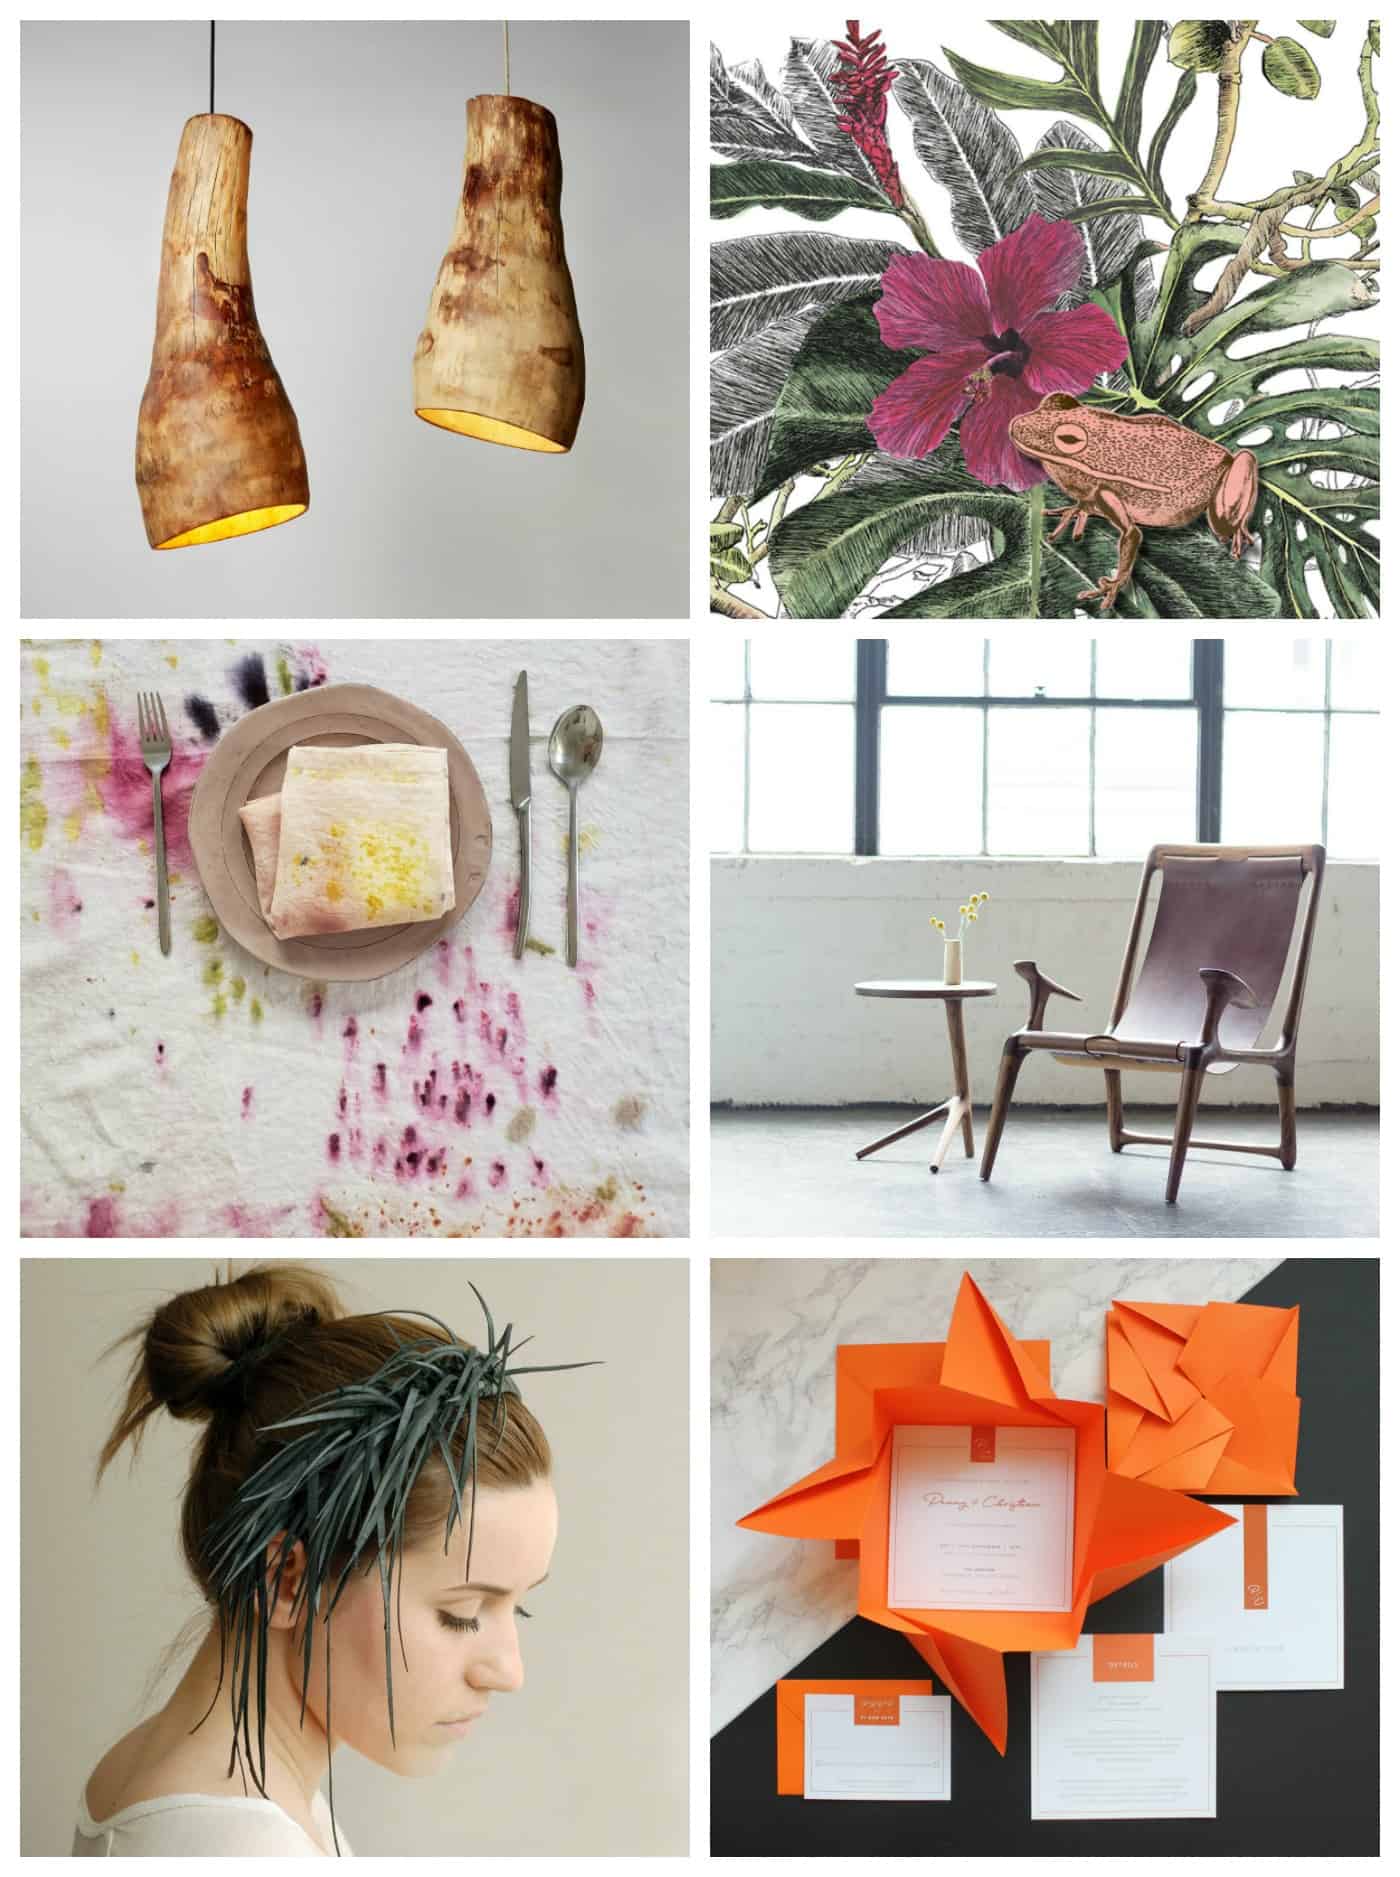 You Will Flip Over These Etsy Design Awards Finalists · Craftwhack